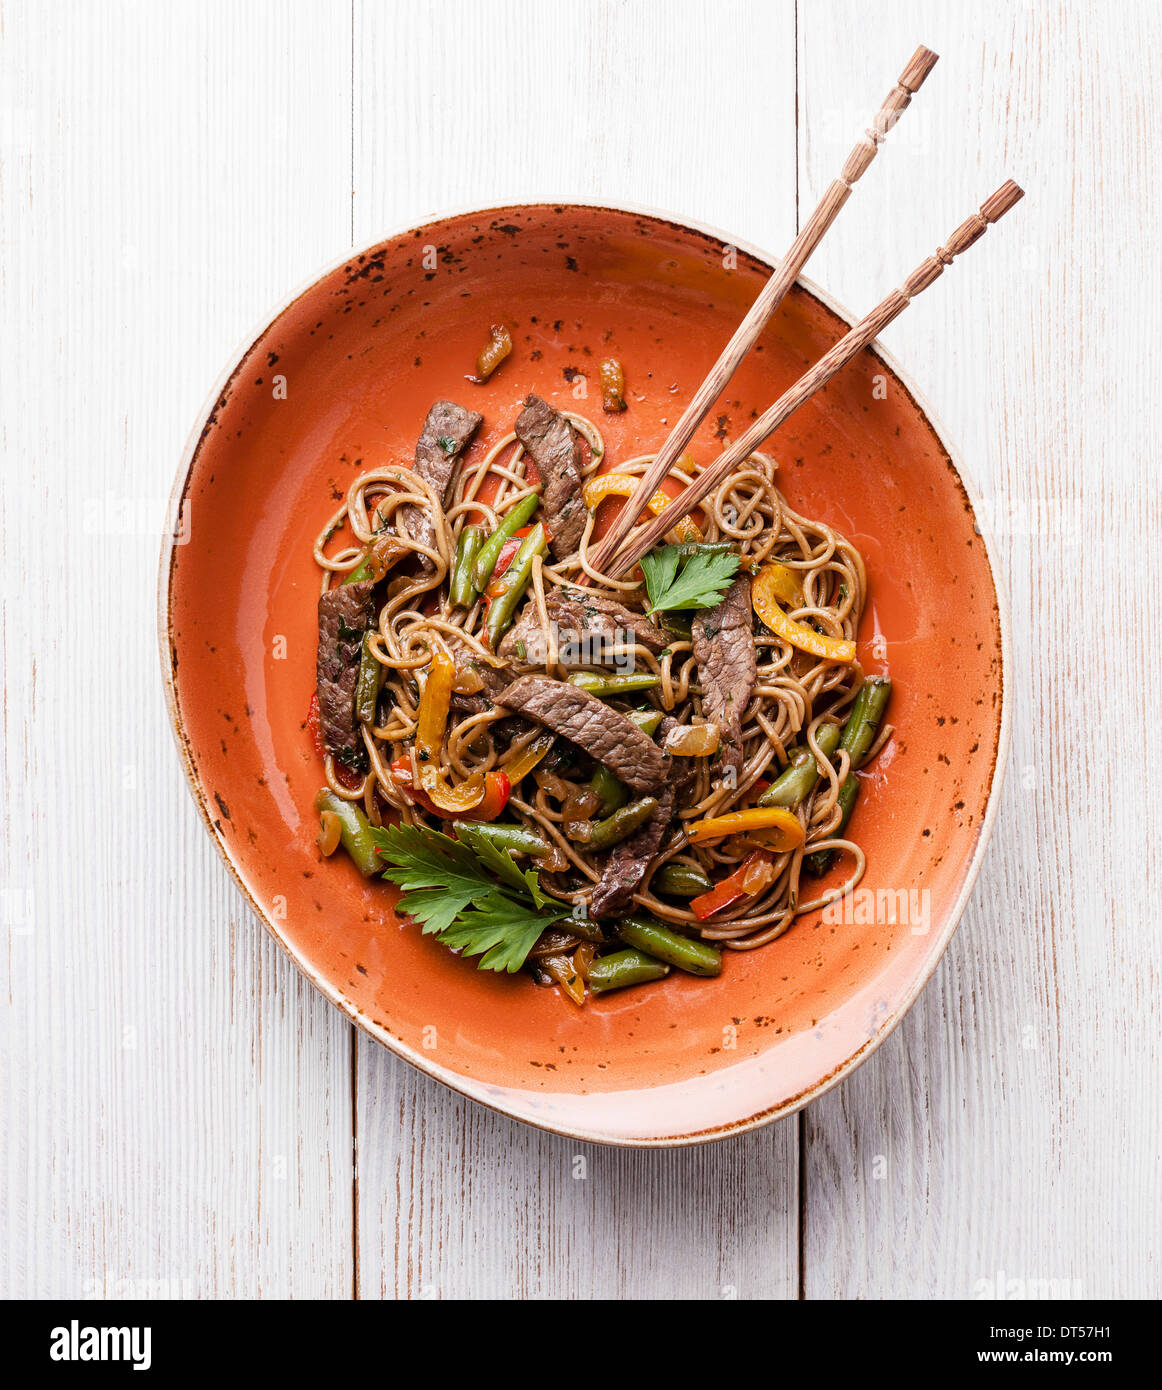 Fried noodles Yakisoba with beef on red plate Stock Photo